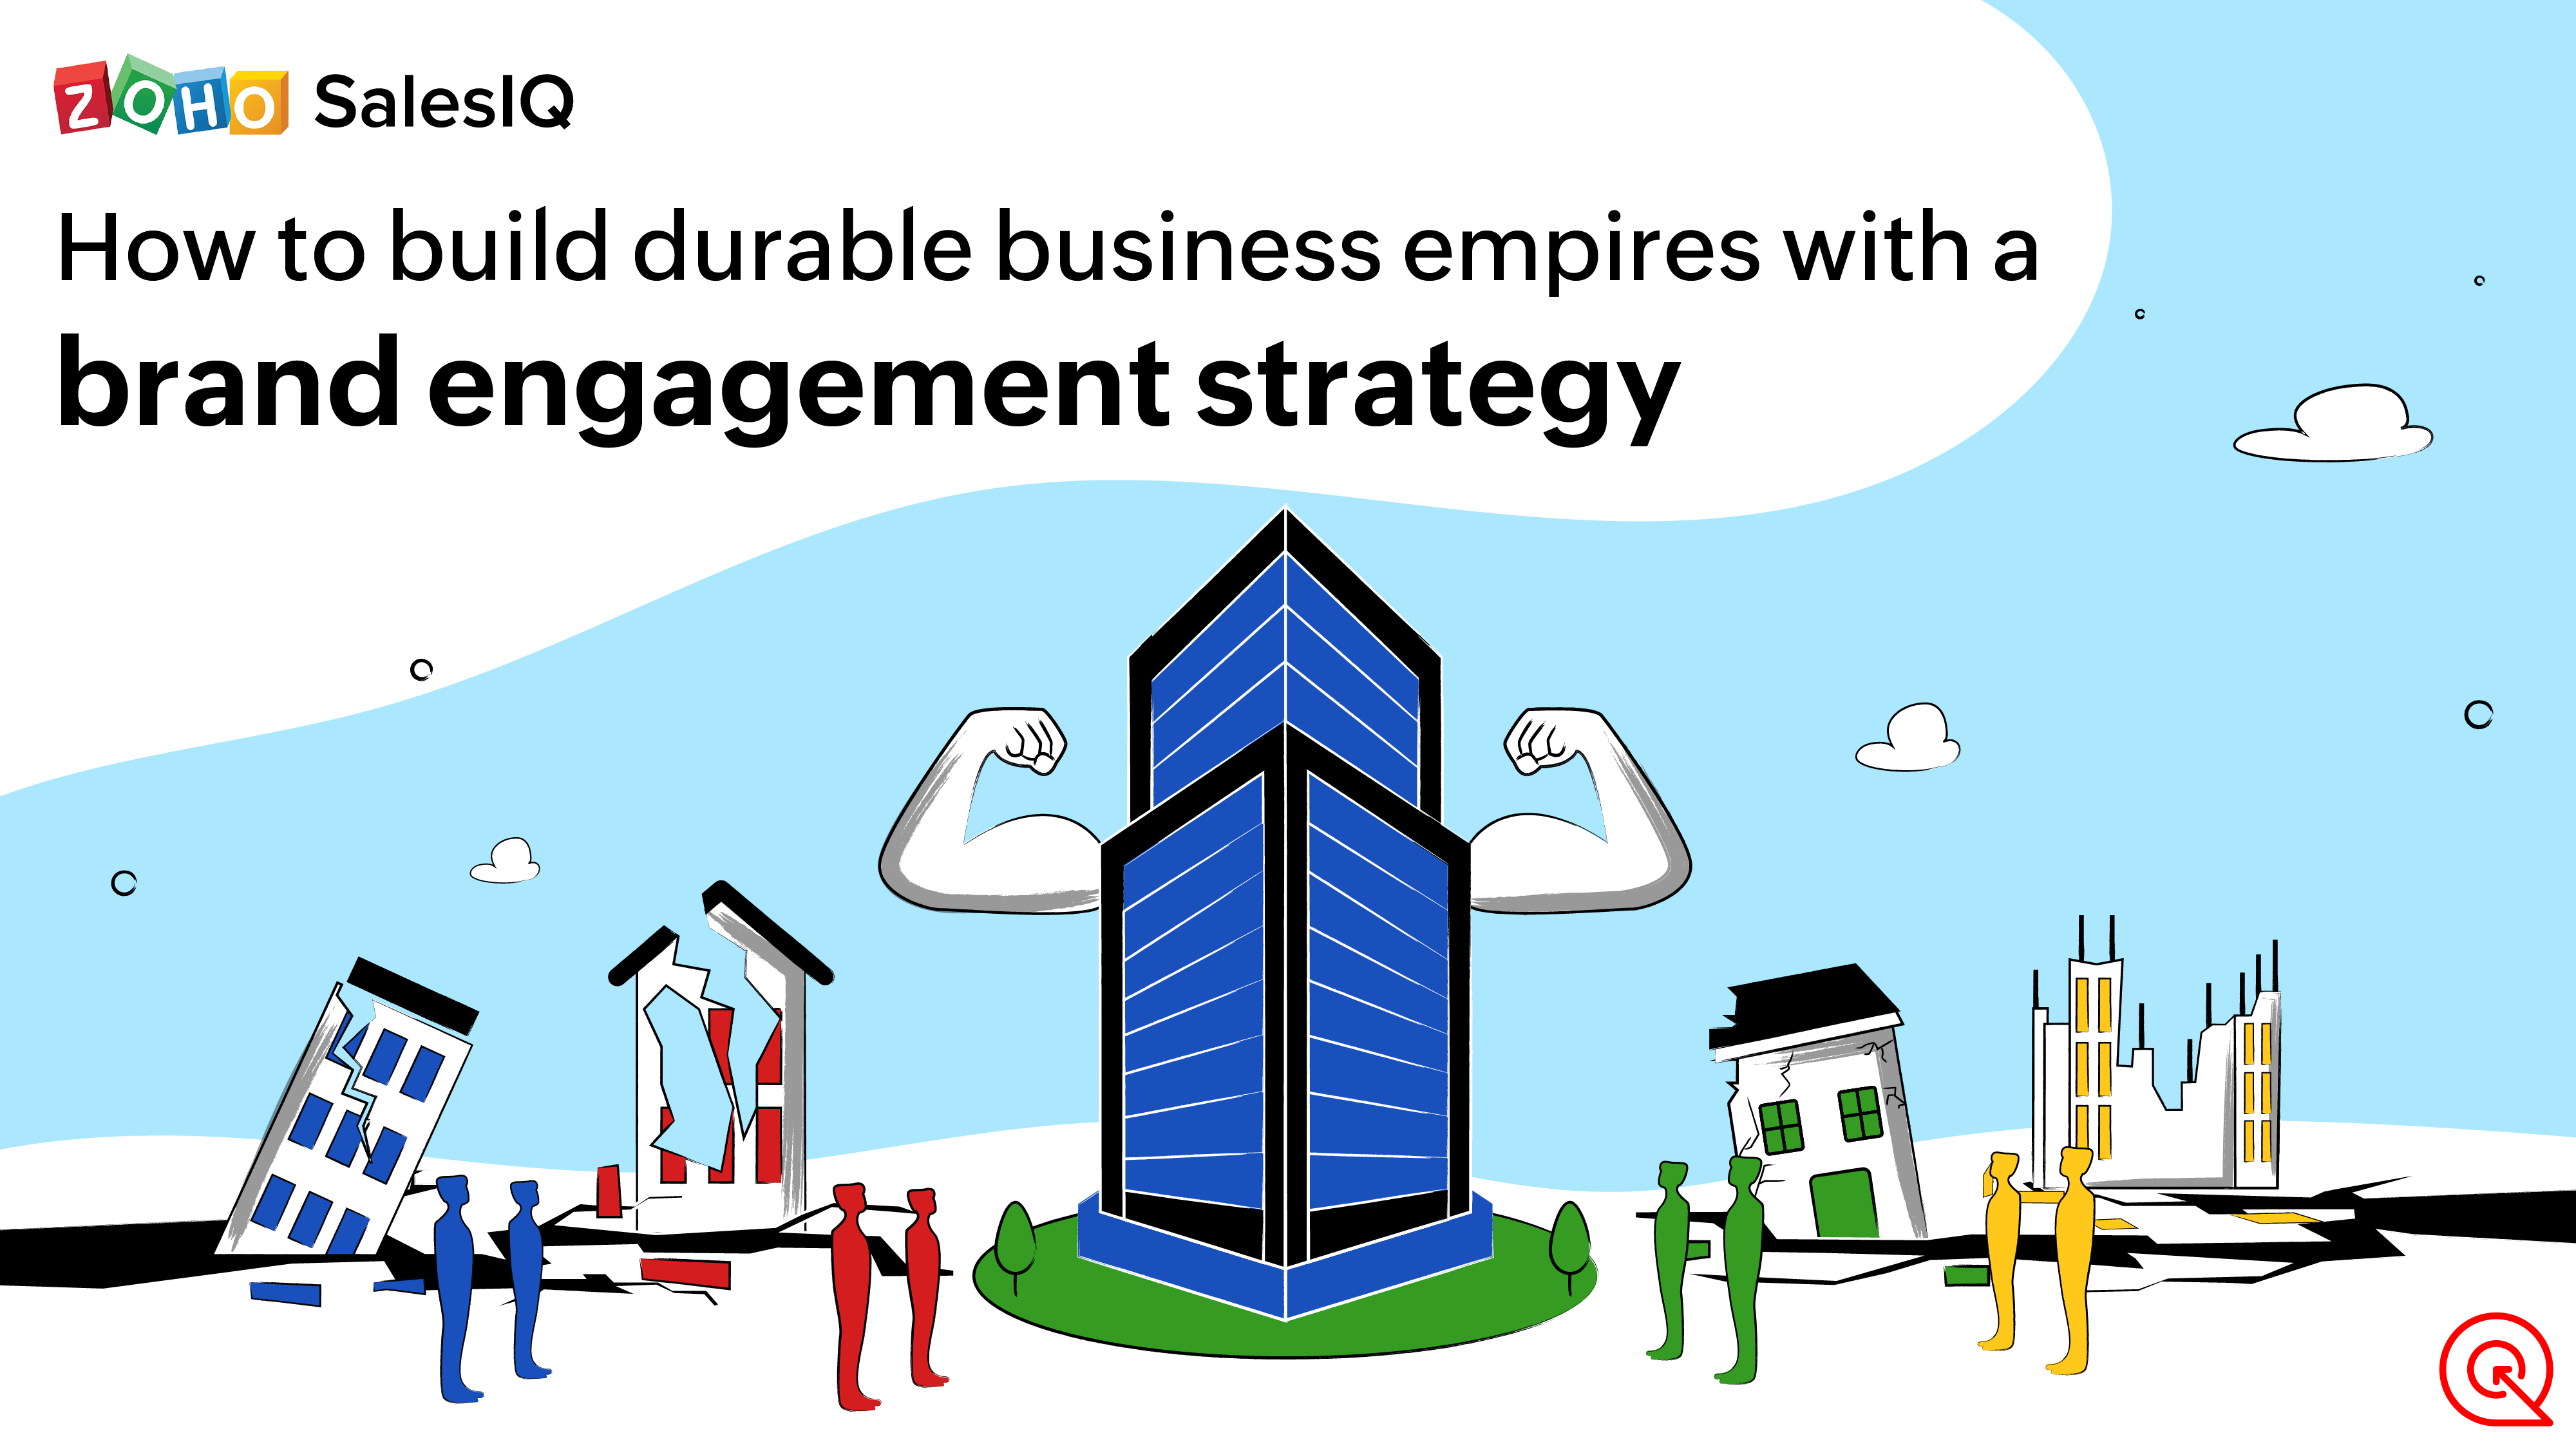 How to build a solid brand engagement strategy for your business